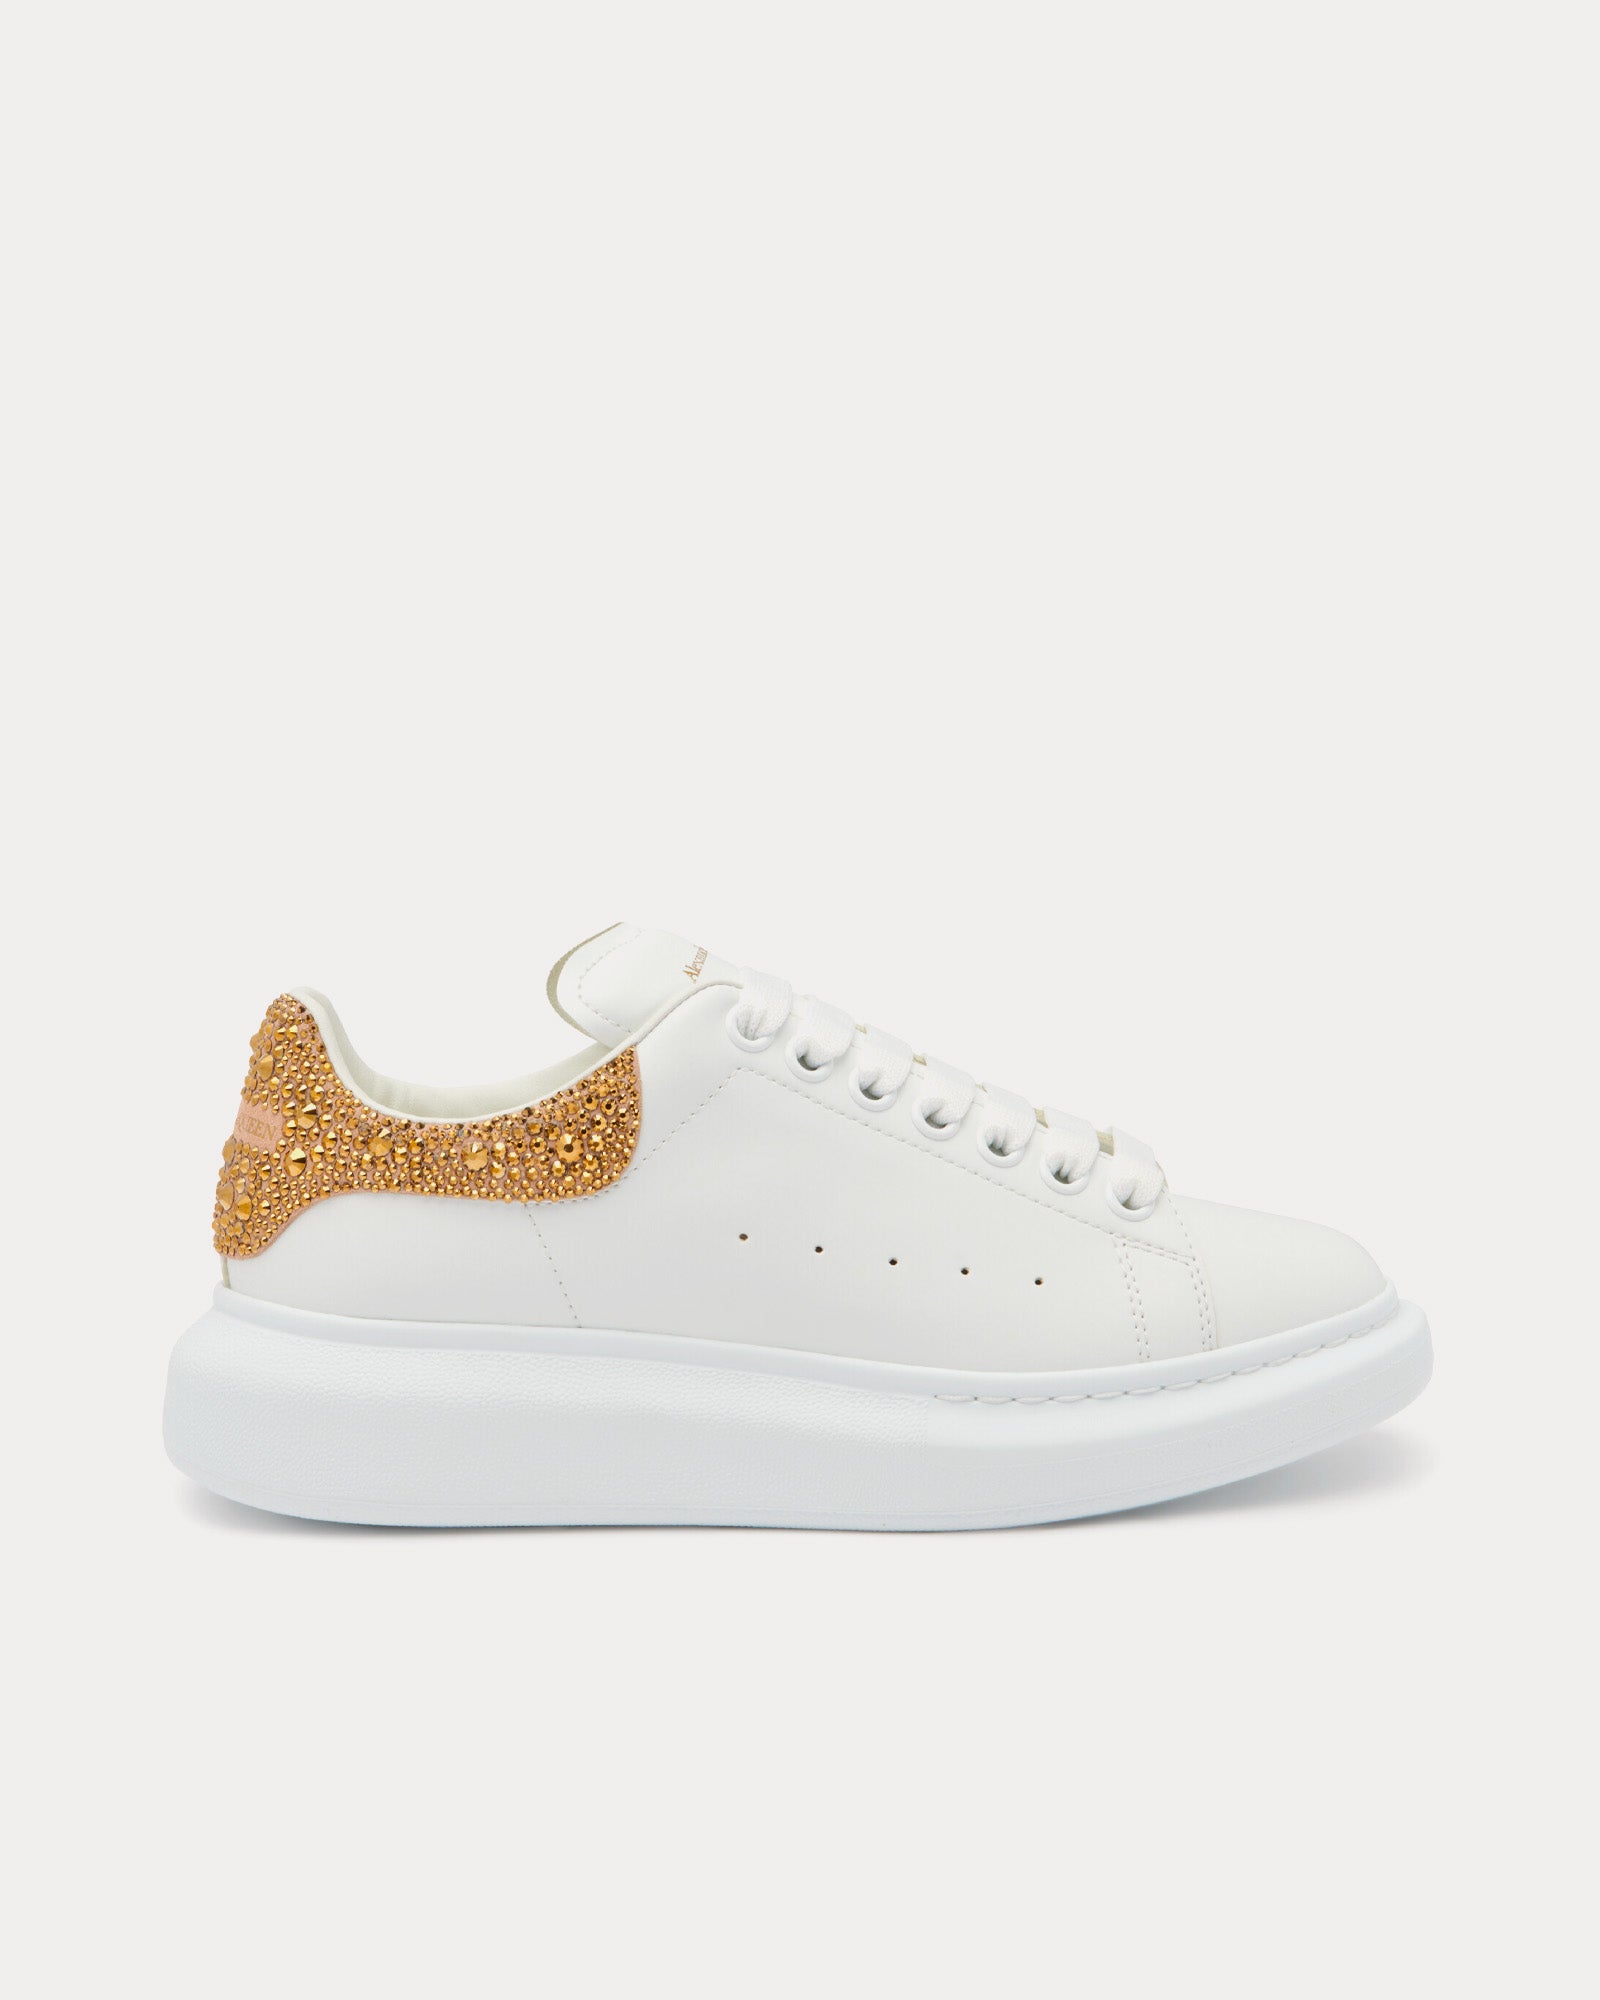 Alexander McQueen - Oversized with Crystal Embellished Heel White / Camel Low Top Sneakers